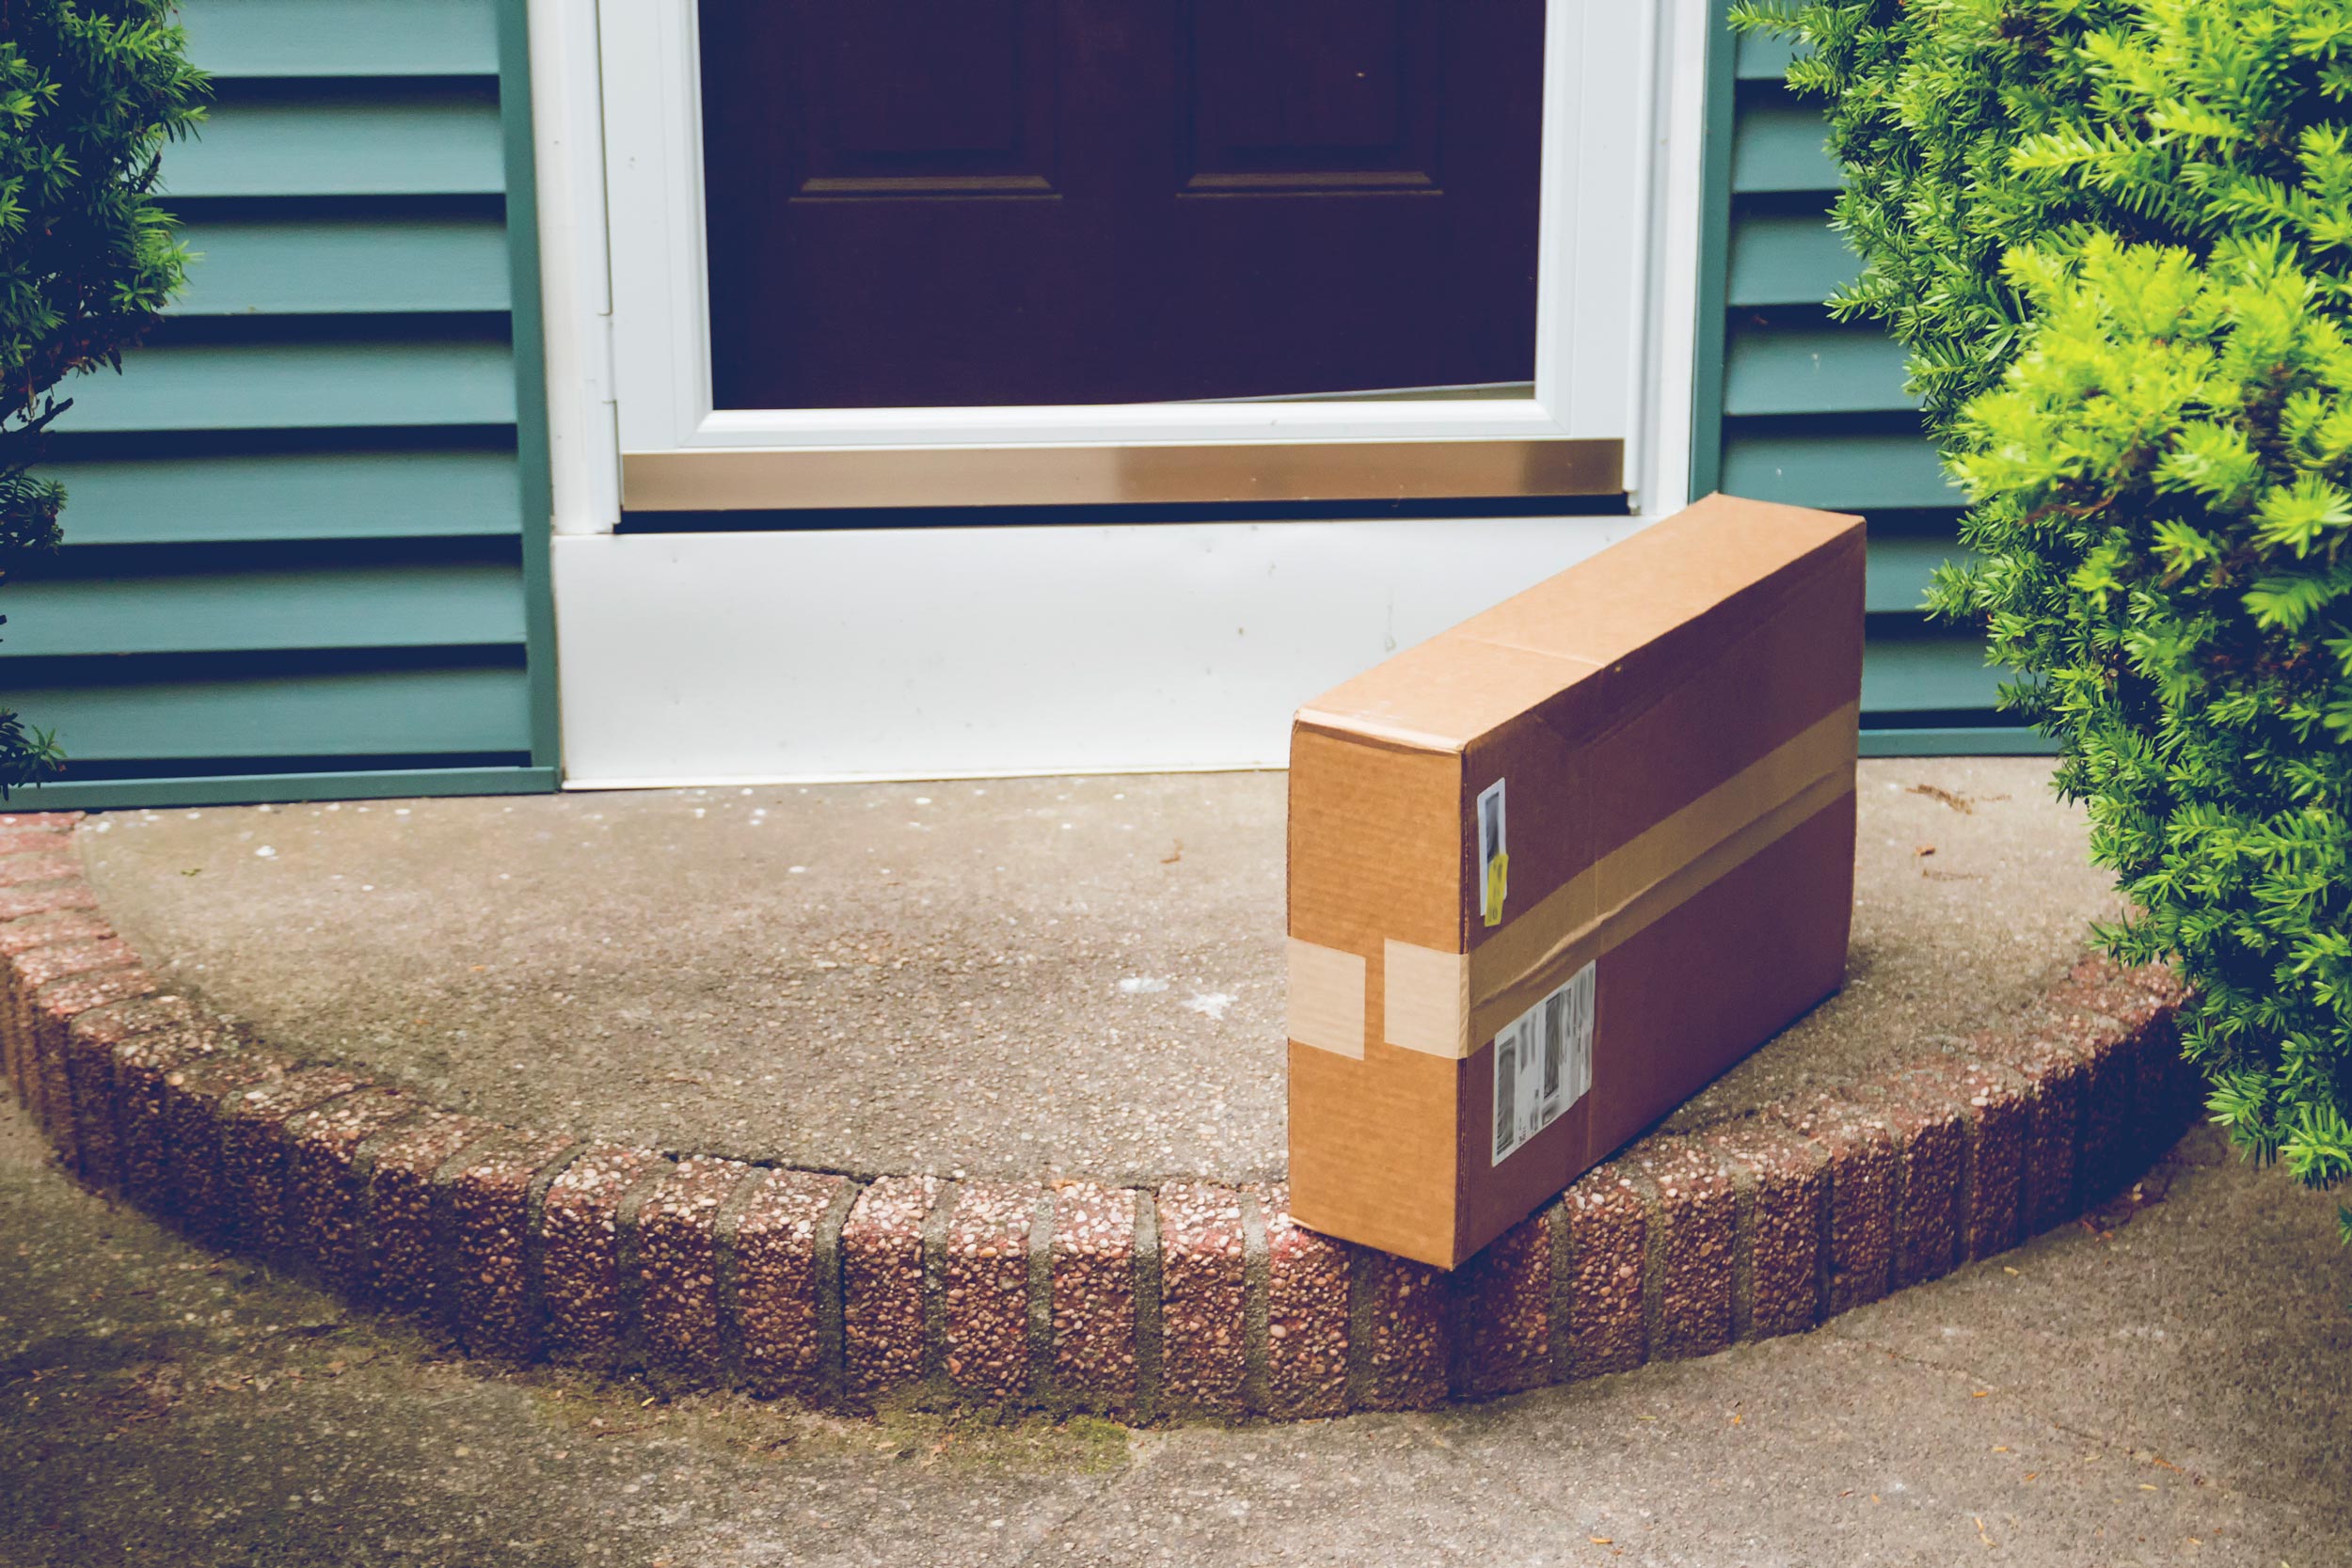 Box on a persons doorstep